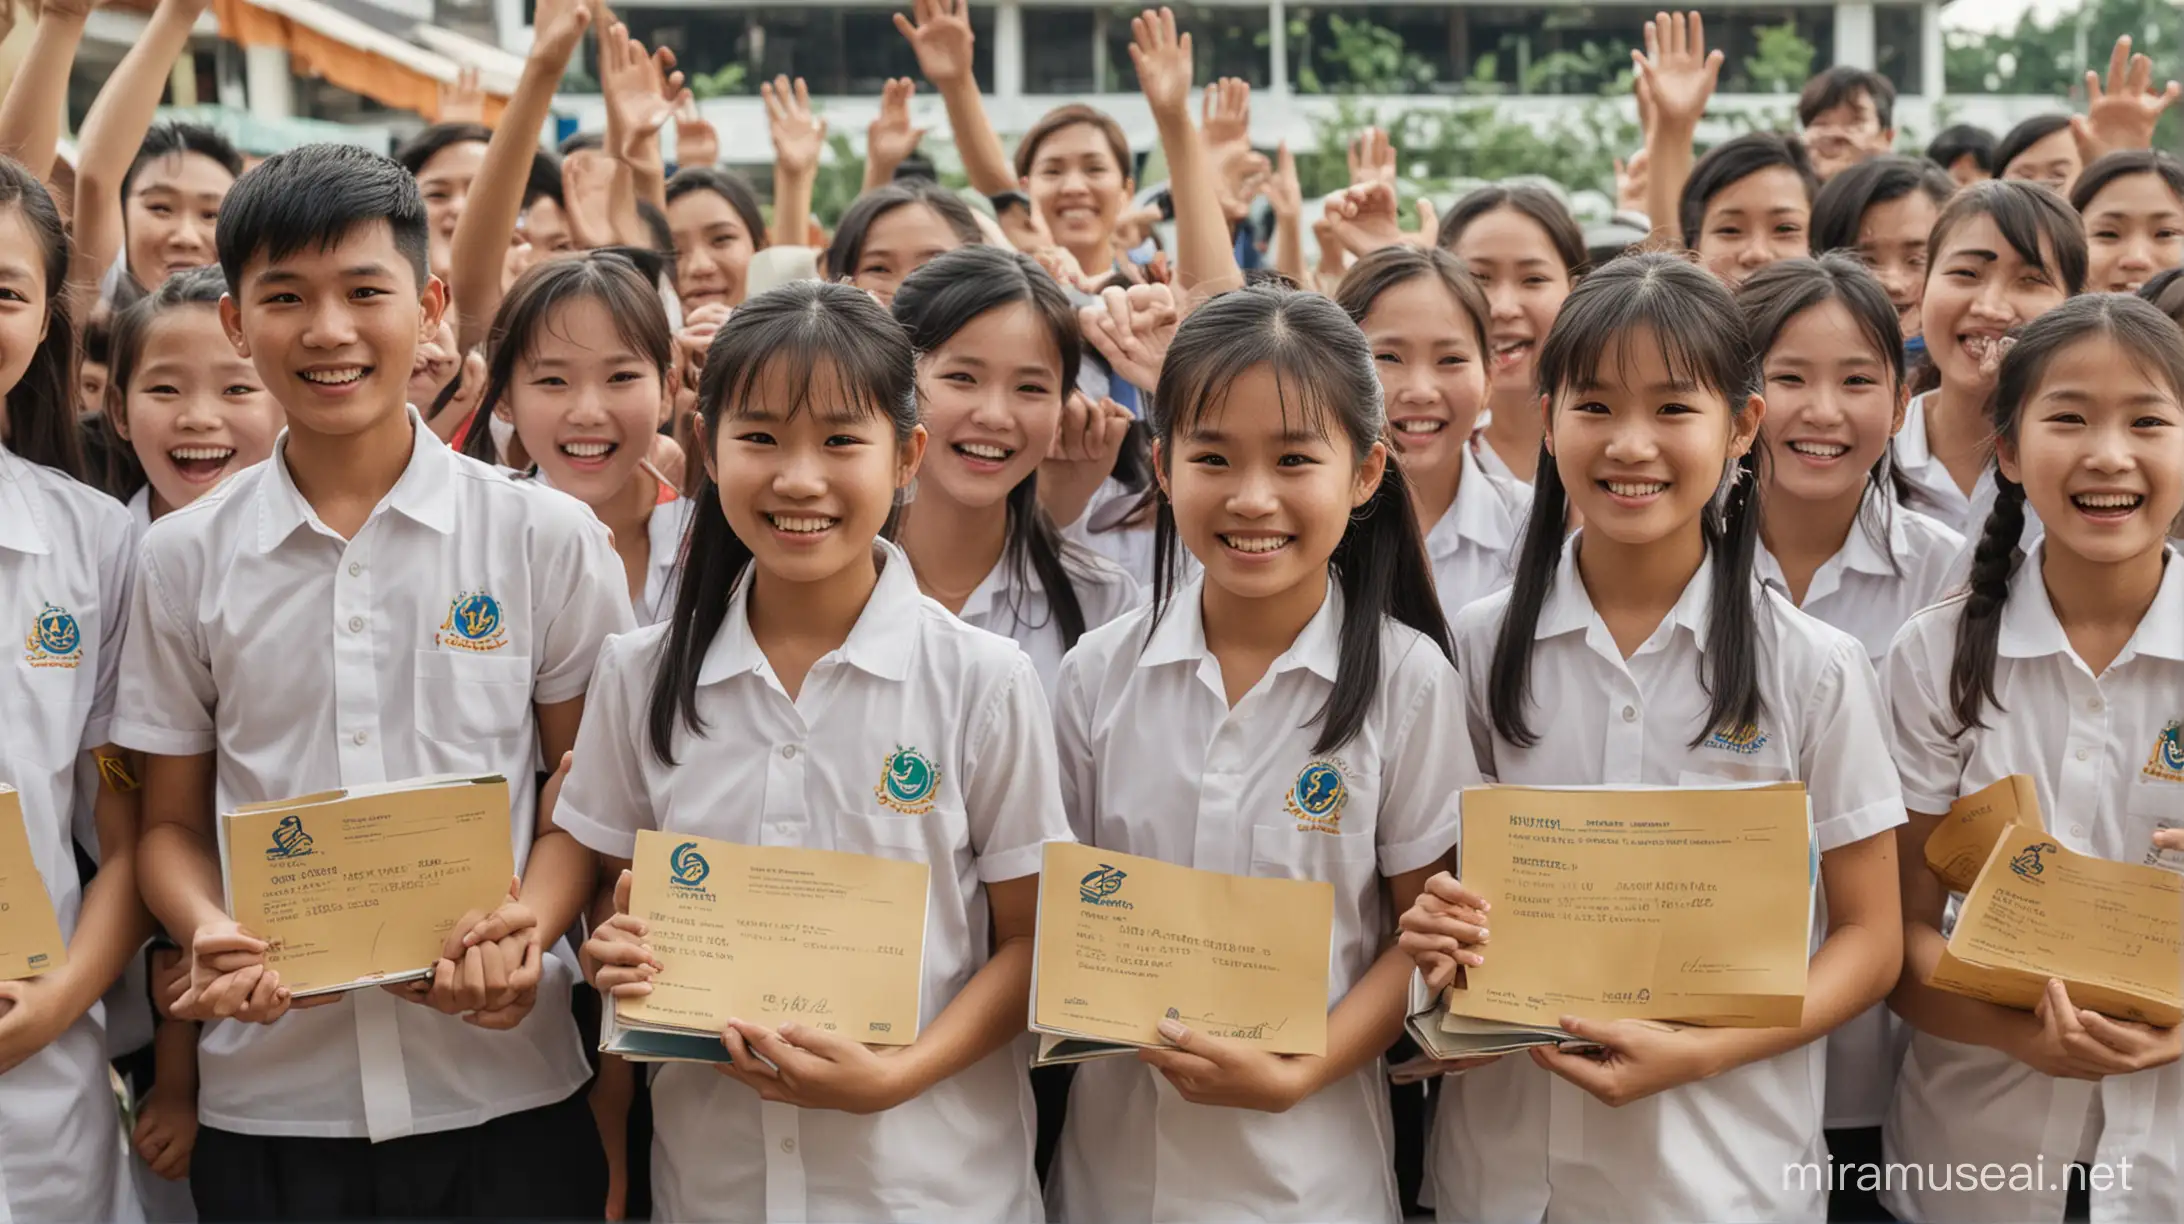 Vietnamese elementary school children, a boy and a girl, won the Summer Arena competition and hold Geniebook scholarships while their parents and teachers celebrate their victory.Fine-tune all faces